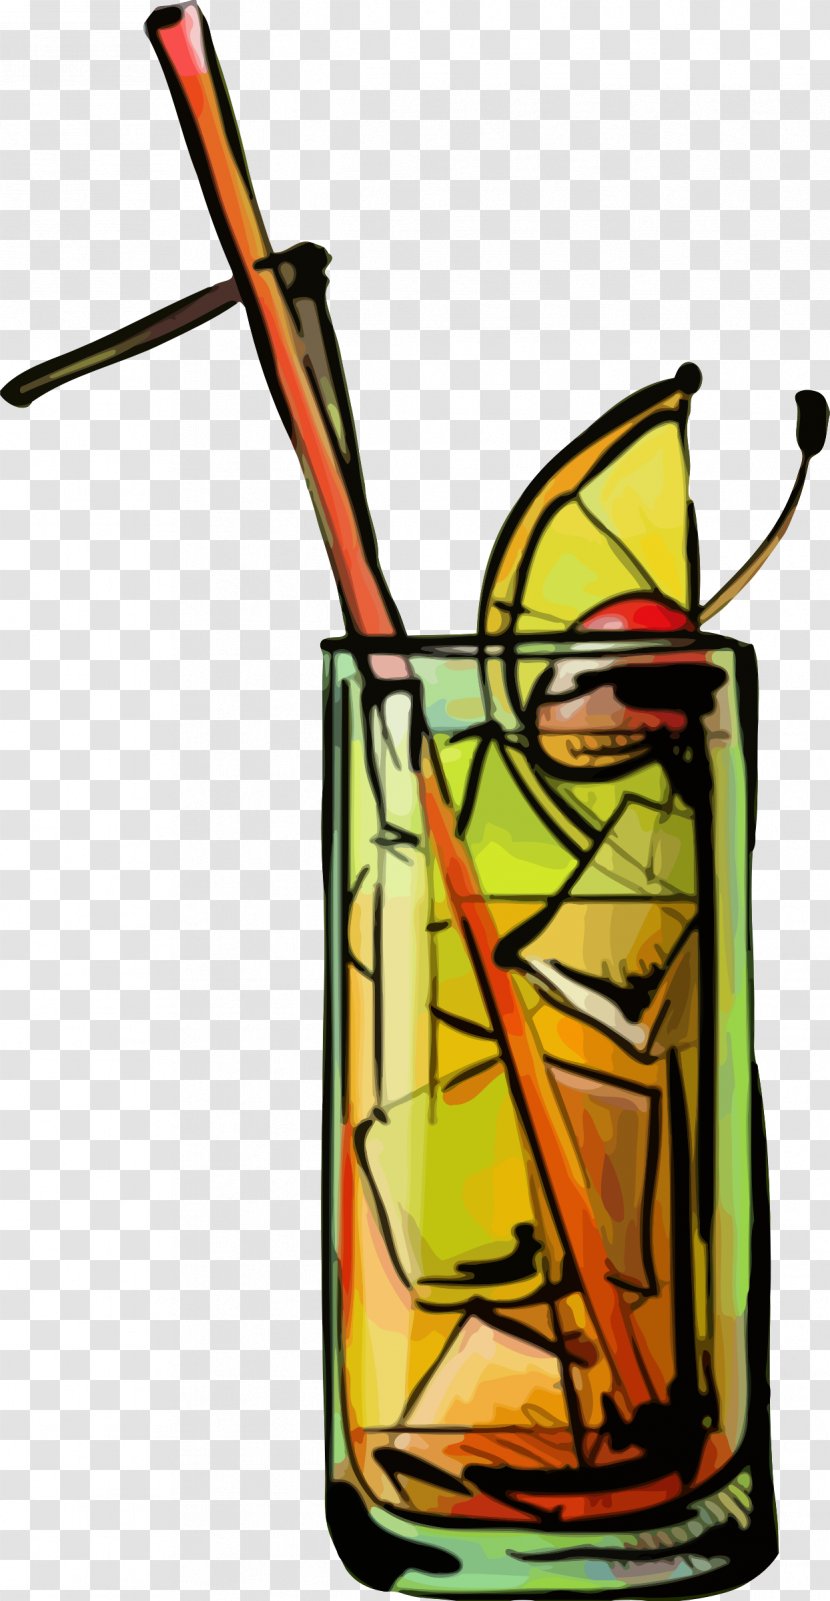 Tequila Sunrise Cocktail Mojito Blue Lagoon Rum - Glass Transparent PNG